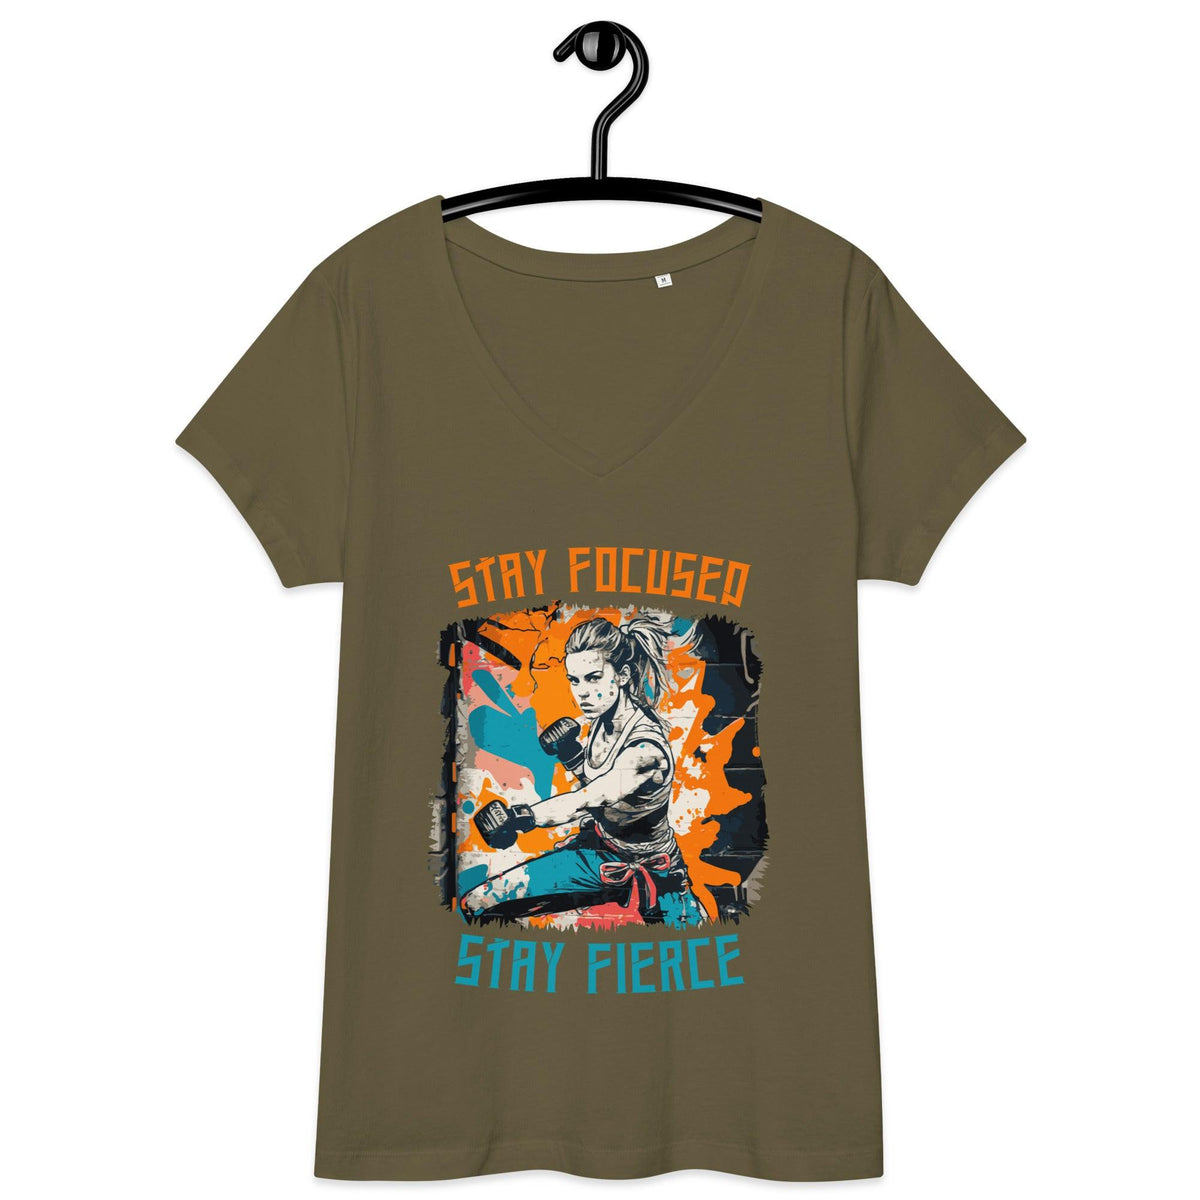 Stay Focused Stay Fierce Women’s Fitted V-Neck T-Shirt - Beyond T-shirts